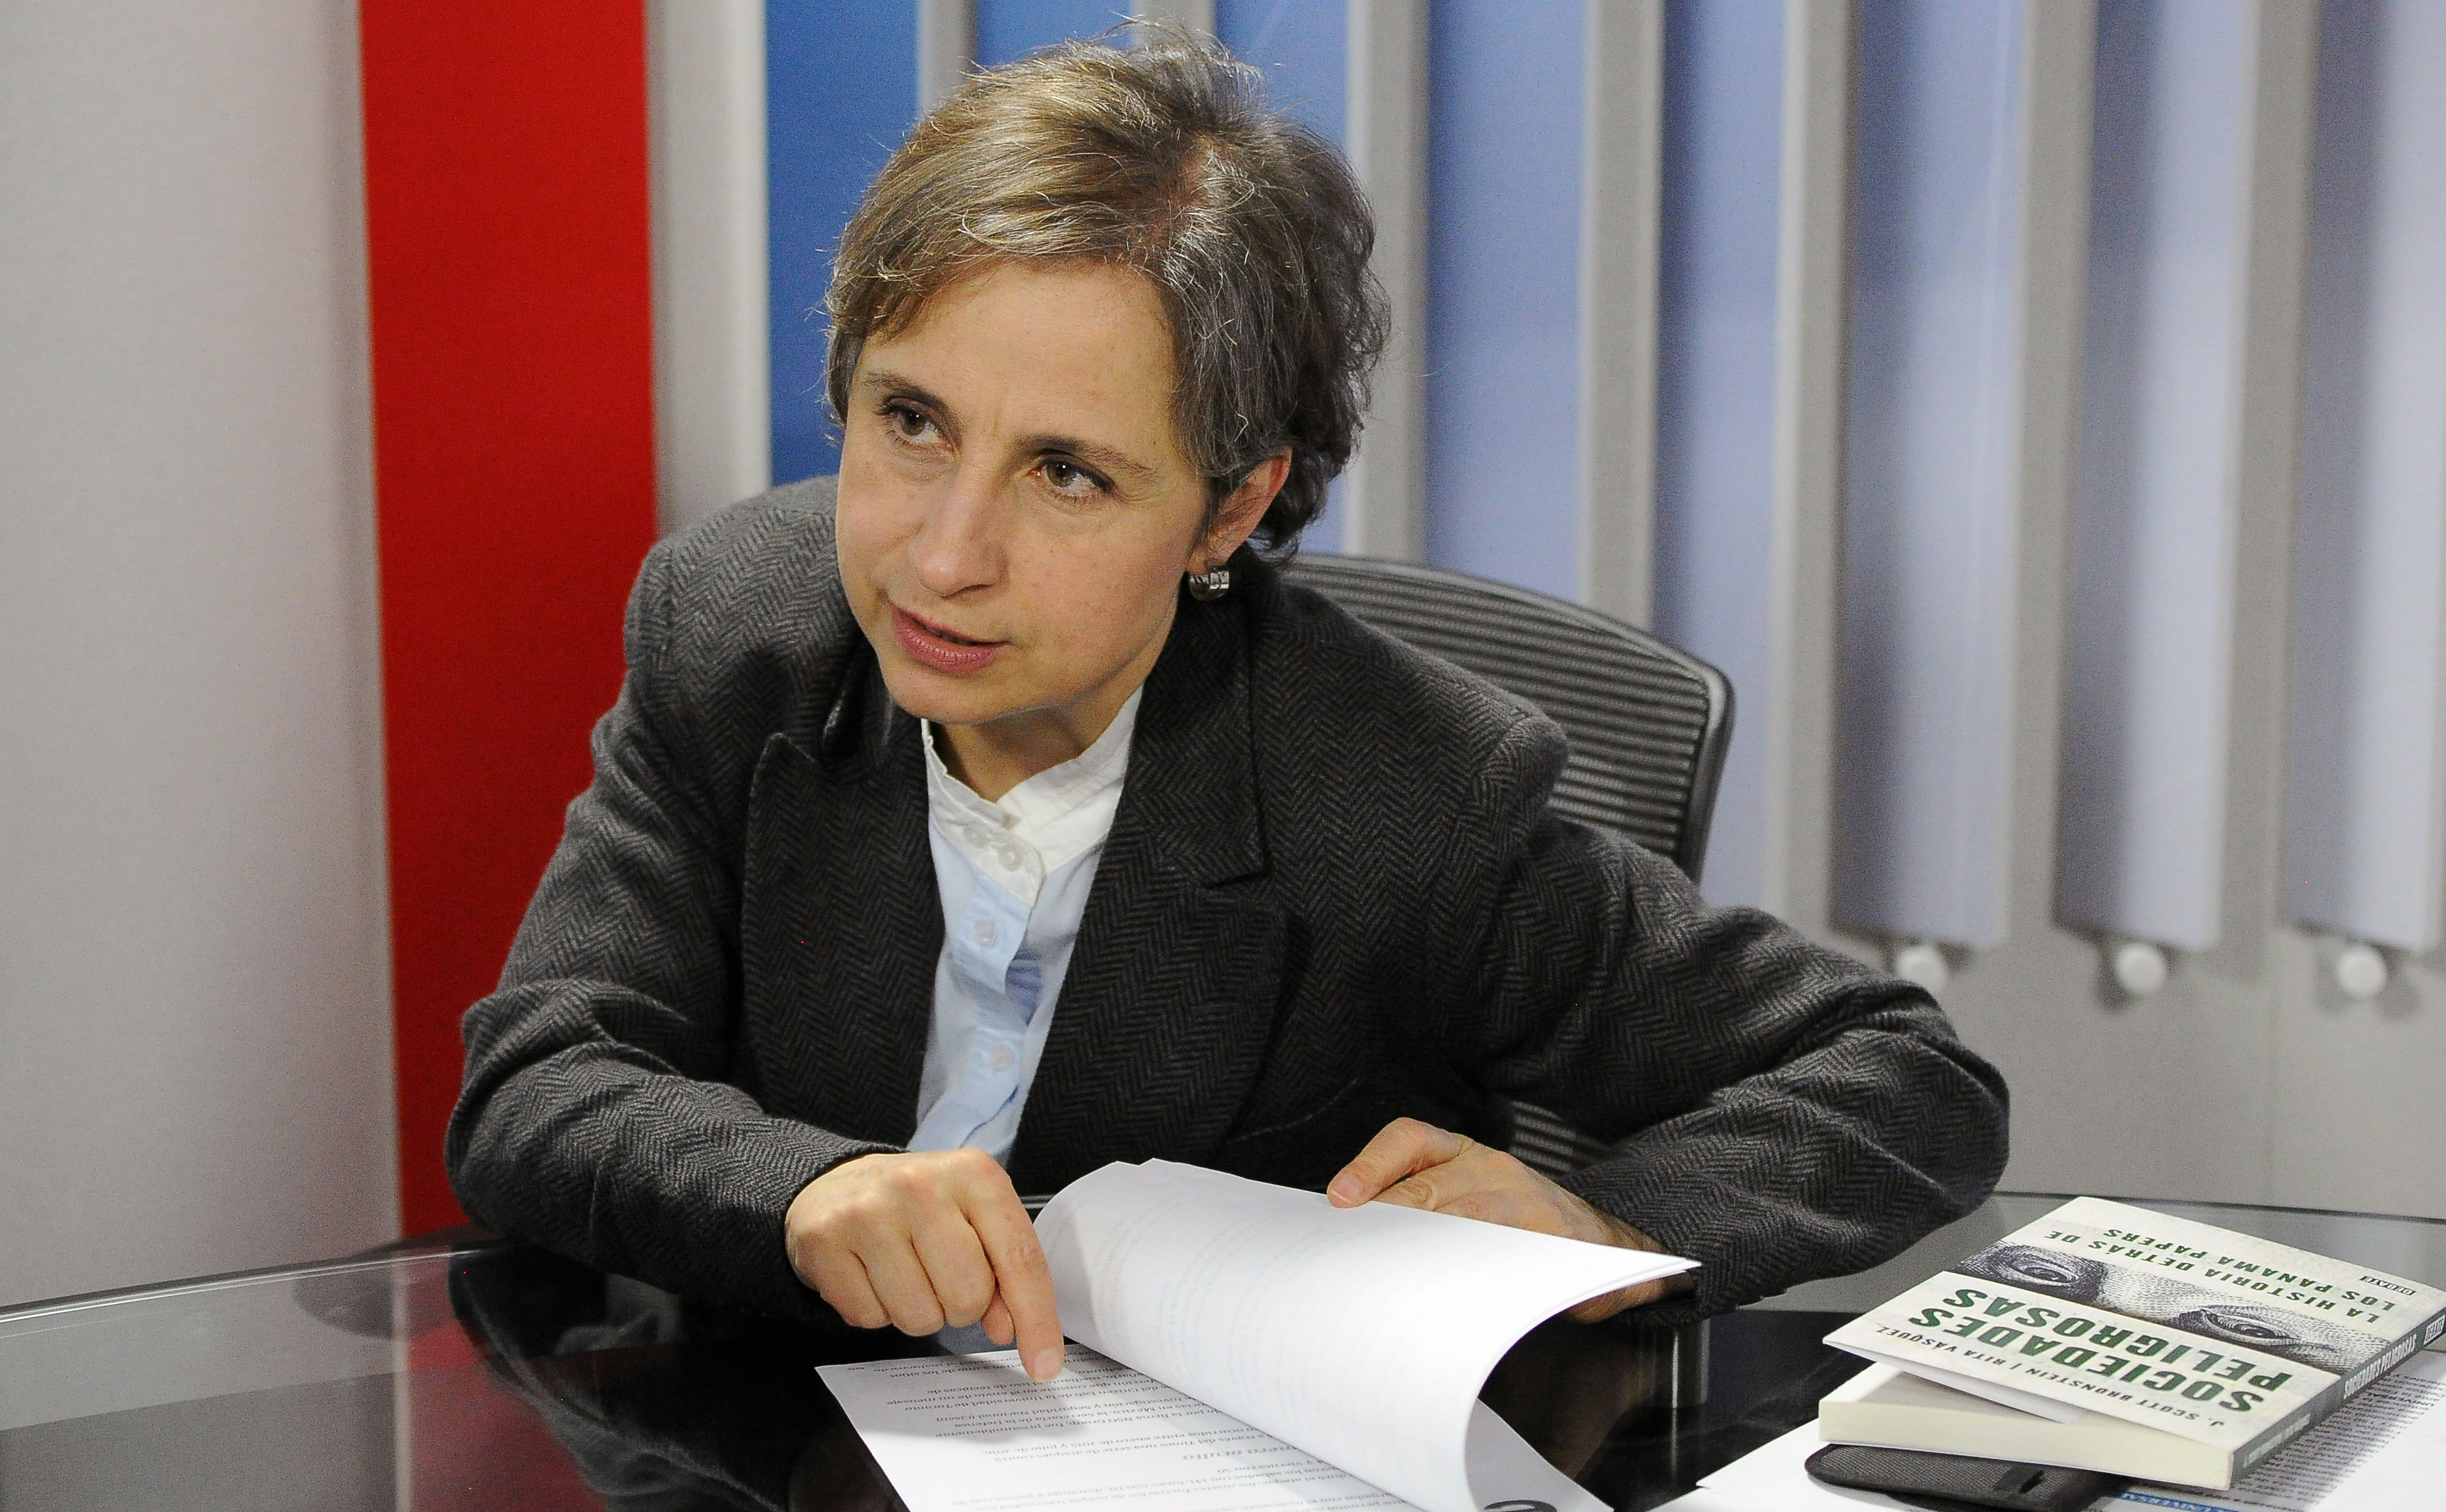 Mexican journalist Carmen Aristegui speaks during an interview with AFP about the New York Times article "Using Texts as Lures, Government Spyware Targets Mexican Journalists and Their Families", in Mexico City on June 22, 2017.Mexican prosecutors said Wednesday they have opened an investigation into allegations the government spied on leading journalists, human rights activists and anti-corruption campaigners. / AFP PHOTO / BERNARDO MONTOYA (Photo credit should read BERNARDO MONTOYA/AFP/Getty Images)